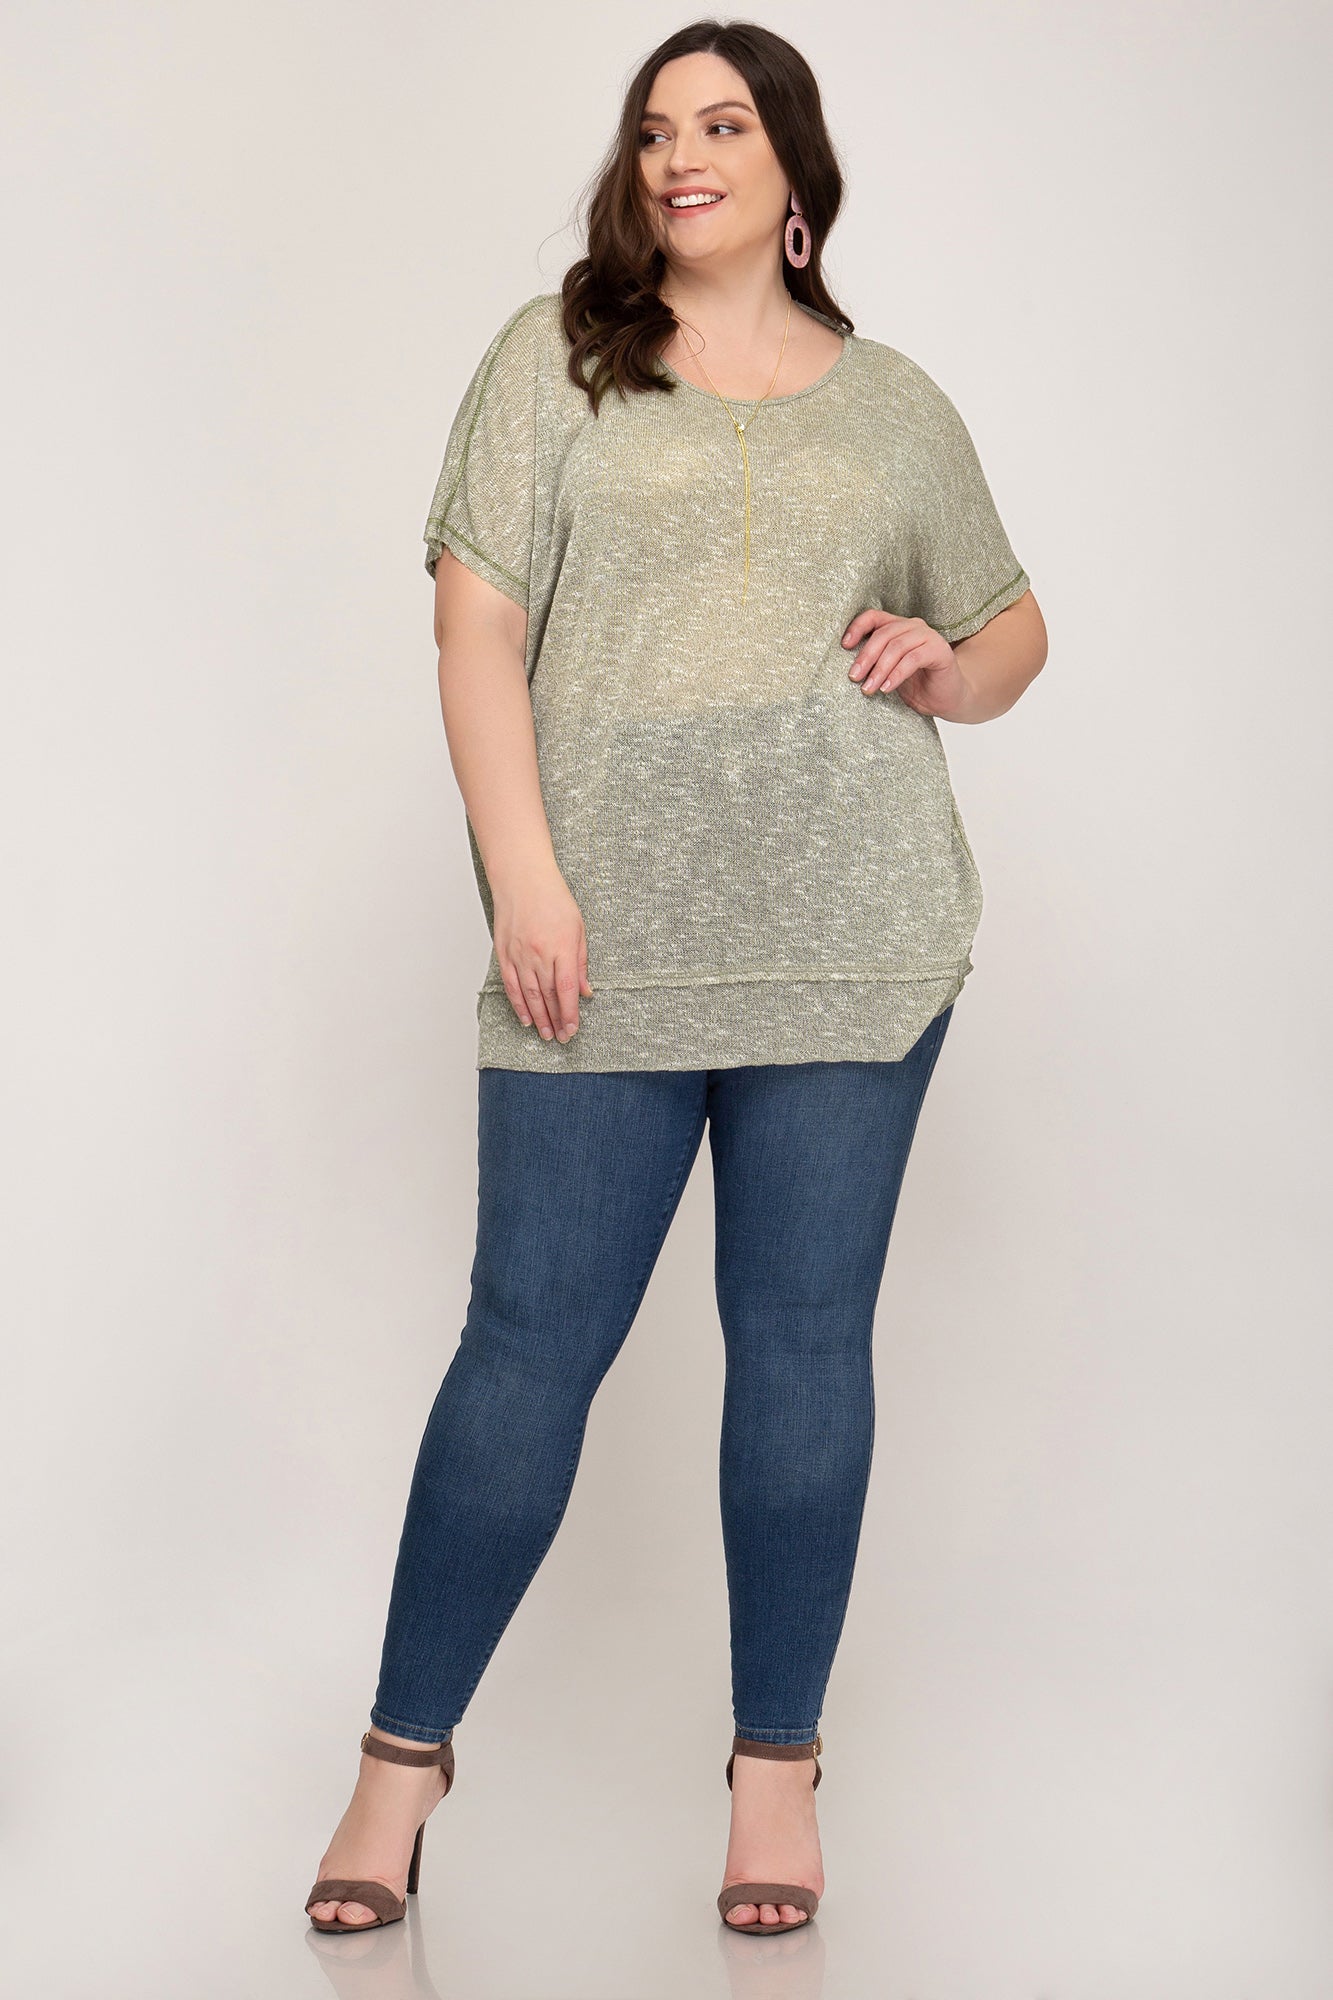 Curvy Style Short Sleeve Top With Twisted Open Back